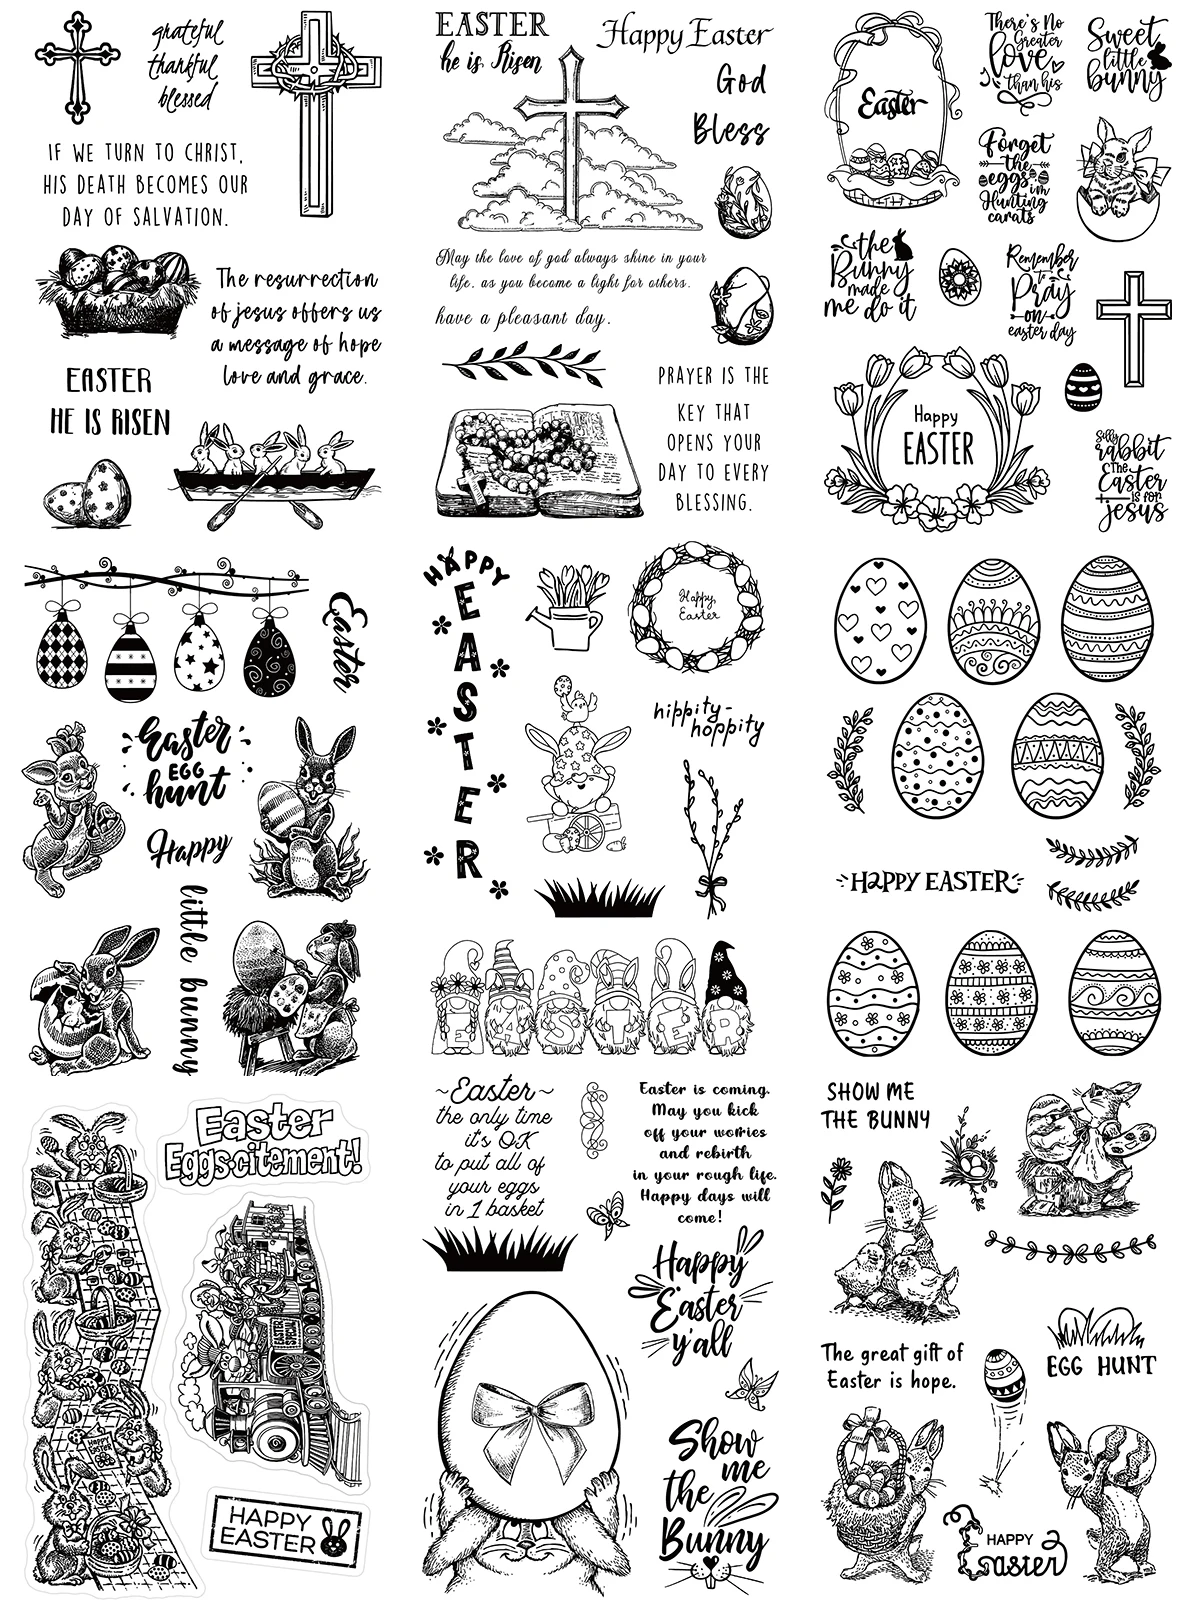 Easter Blessing|Bunnies|Eggs Clear Stamps/Seals For DIY Scrapbooking/Card Making/Album Decorative Silicone Stamp Crafts